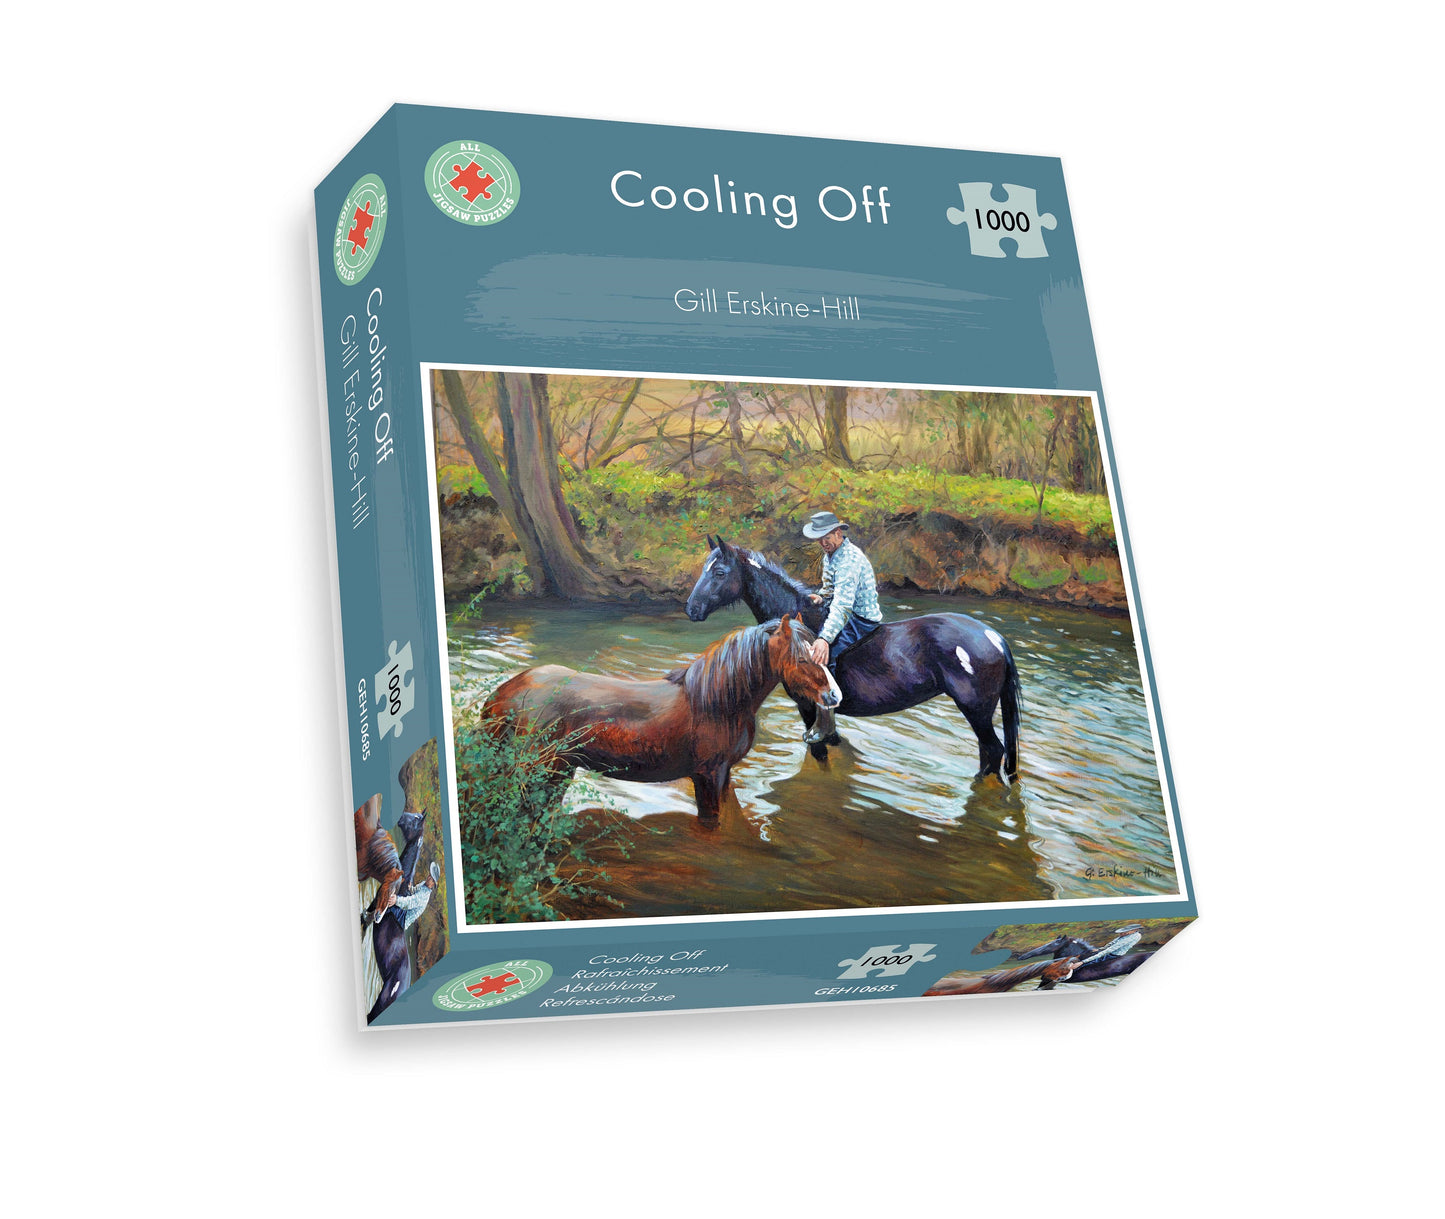 Cooling Off 1000 or 500 Piece Jigsaw Puzzle